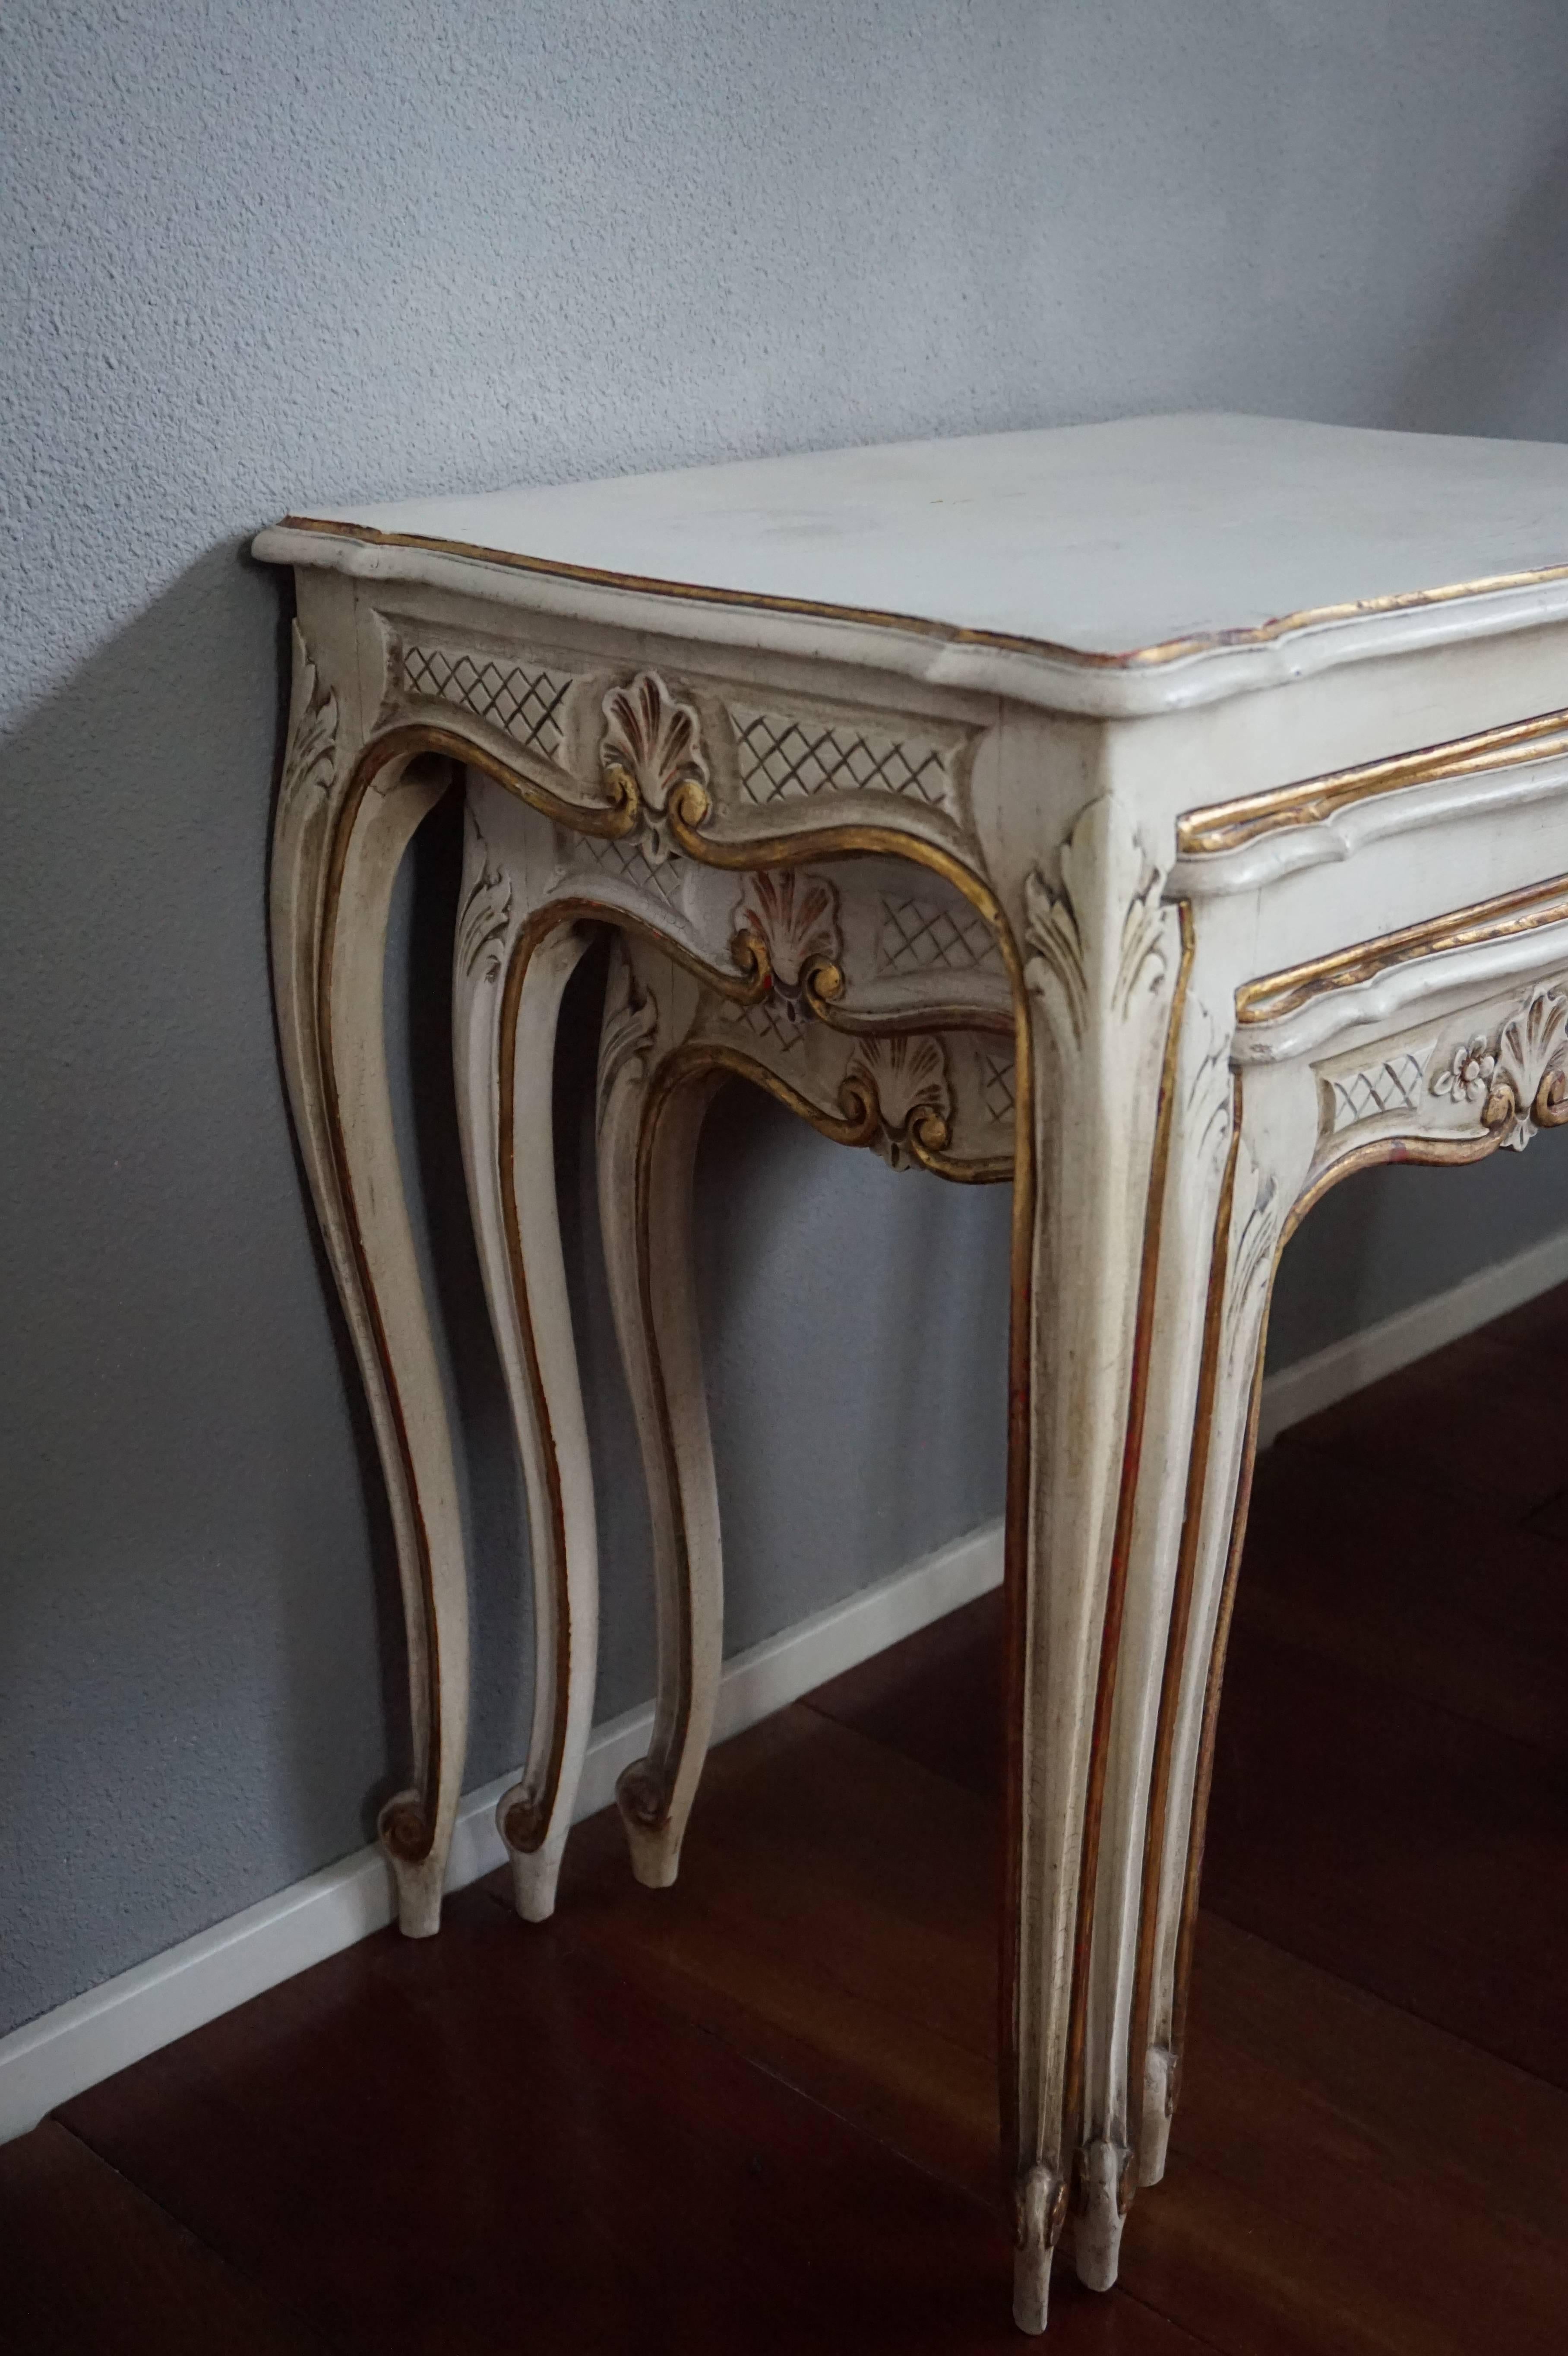 Hand-Carved Early 20th Century Italian or French Nest of Tables in Beige-White with Gilding